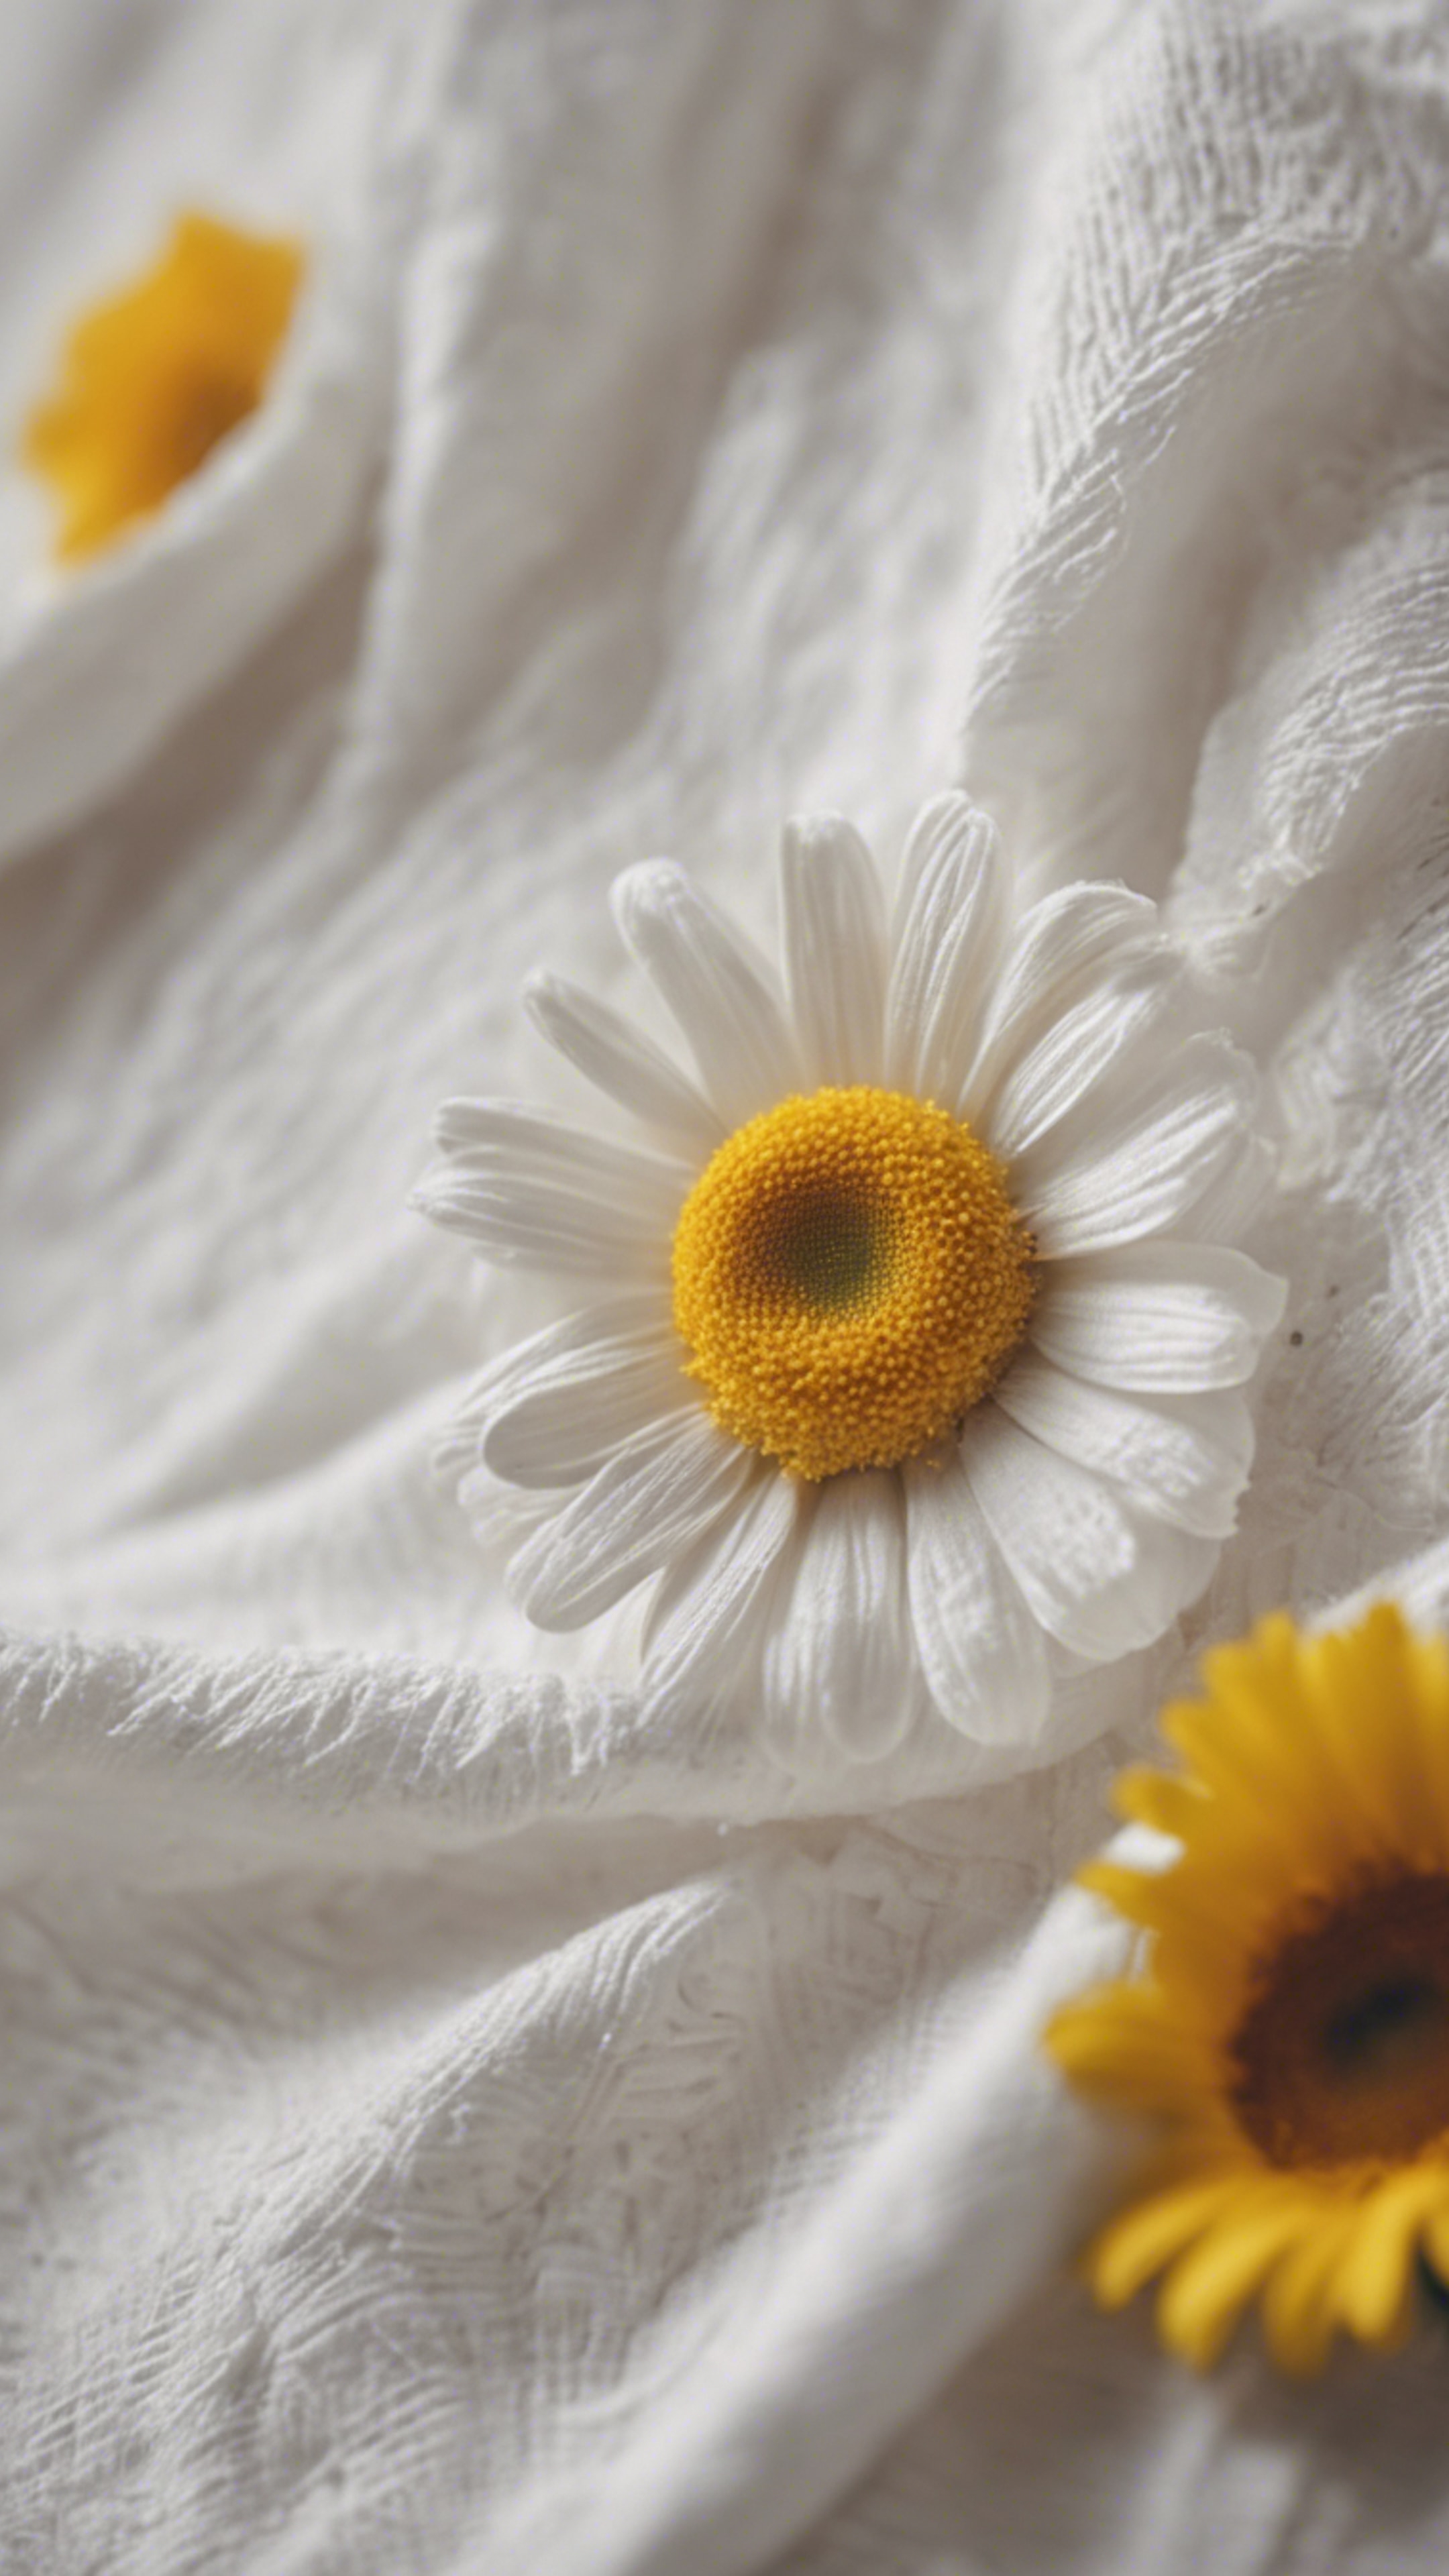 A white cotton dress with a daisy, featuring yellow petals and a white center. Tapet[81c17e18773146008e6c]